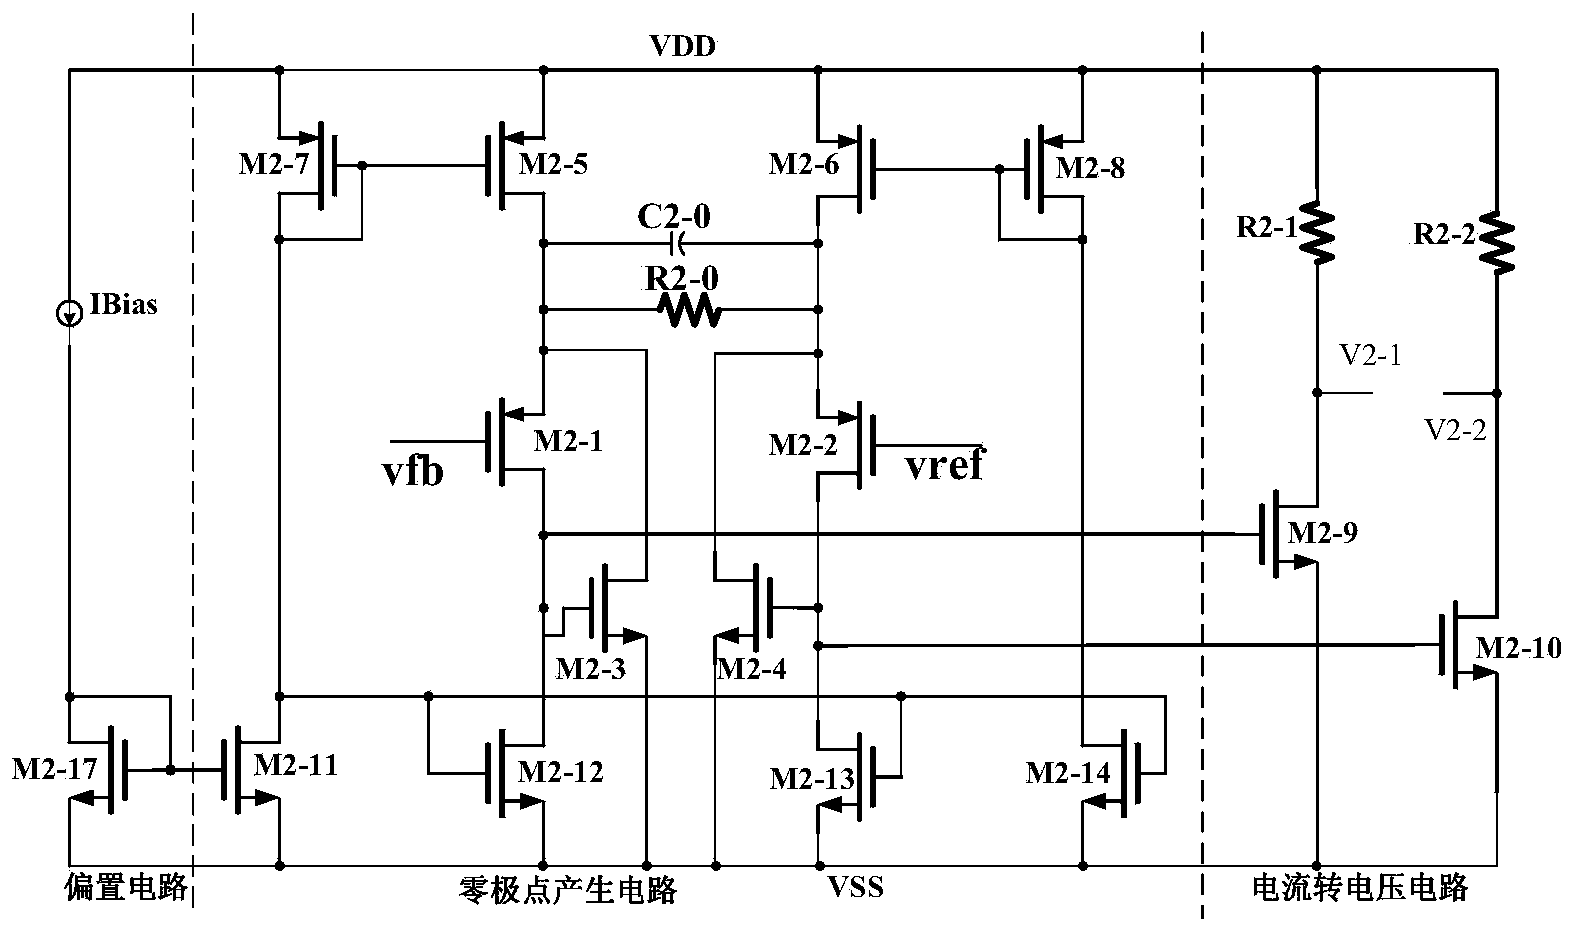 Loop circuit compensating circuit used for Buck converter